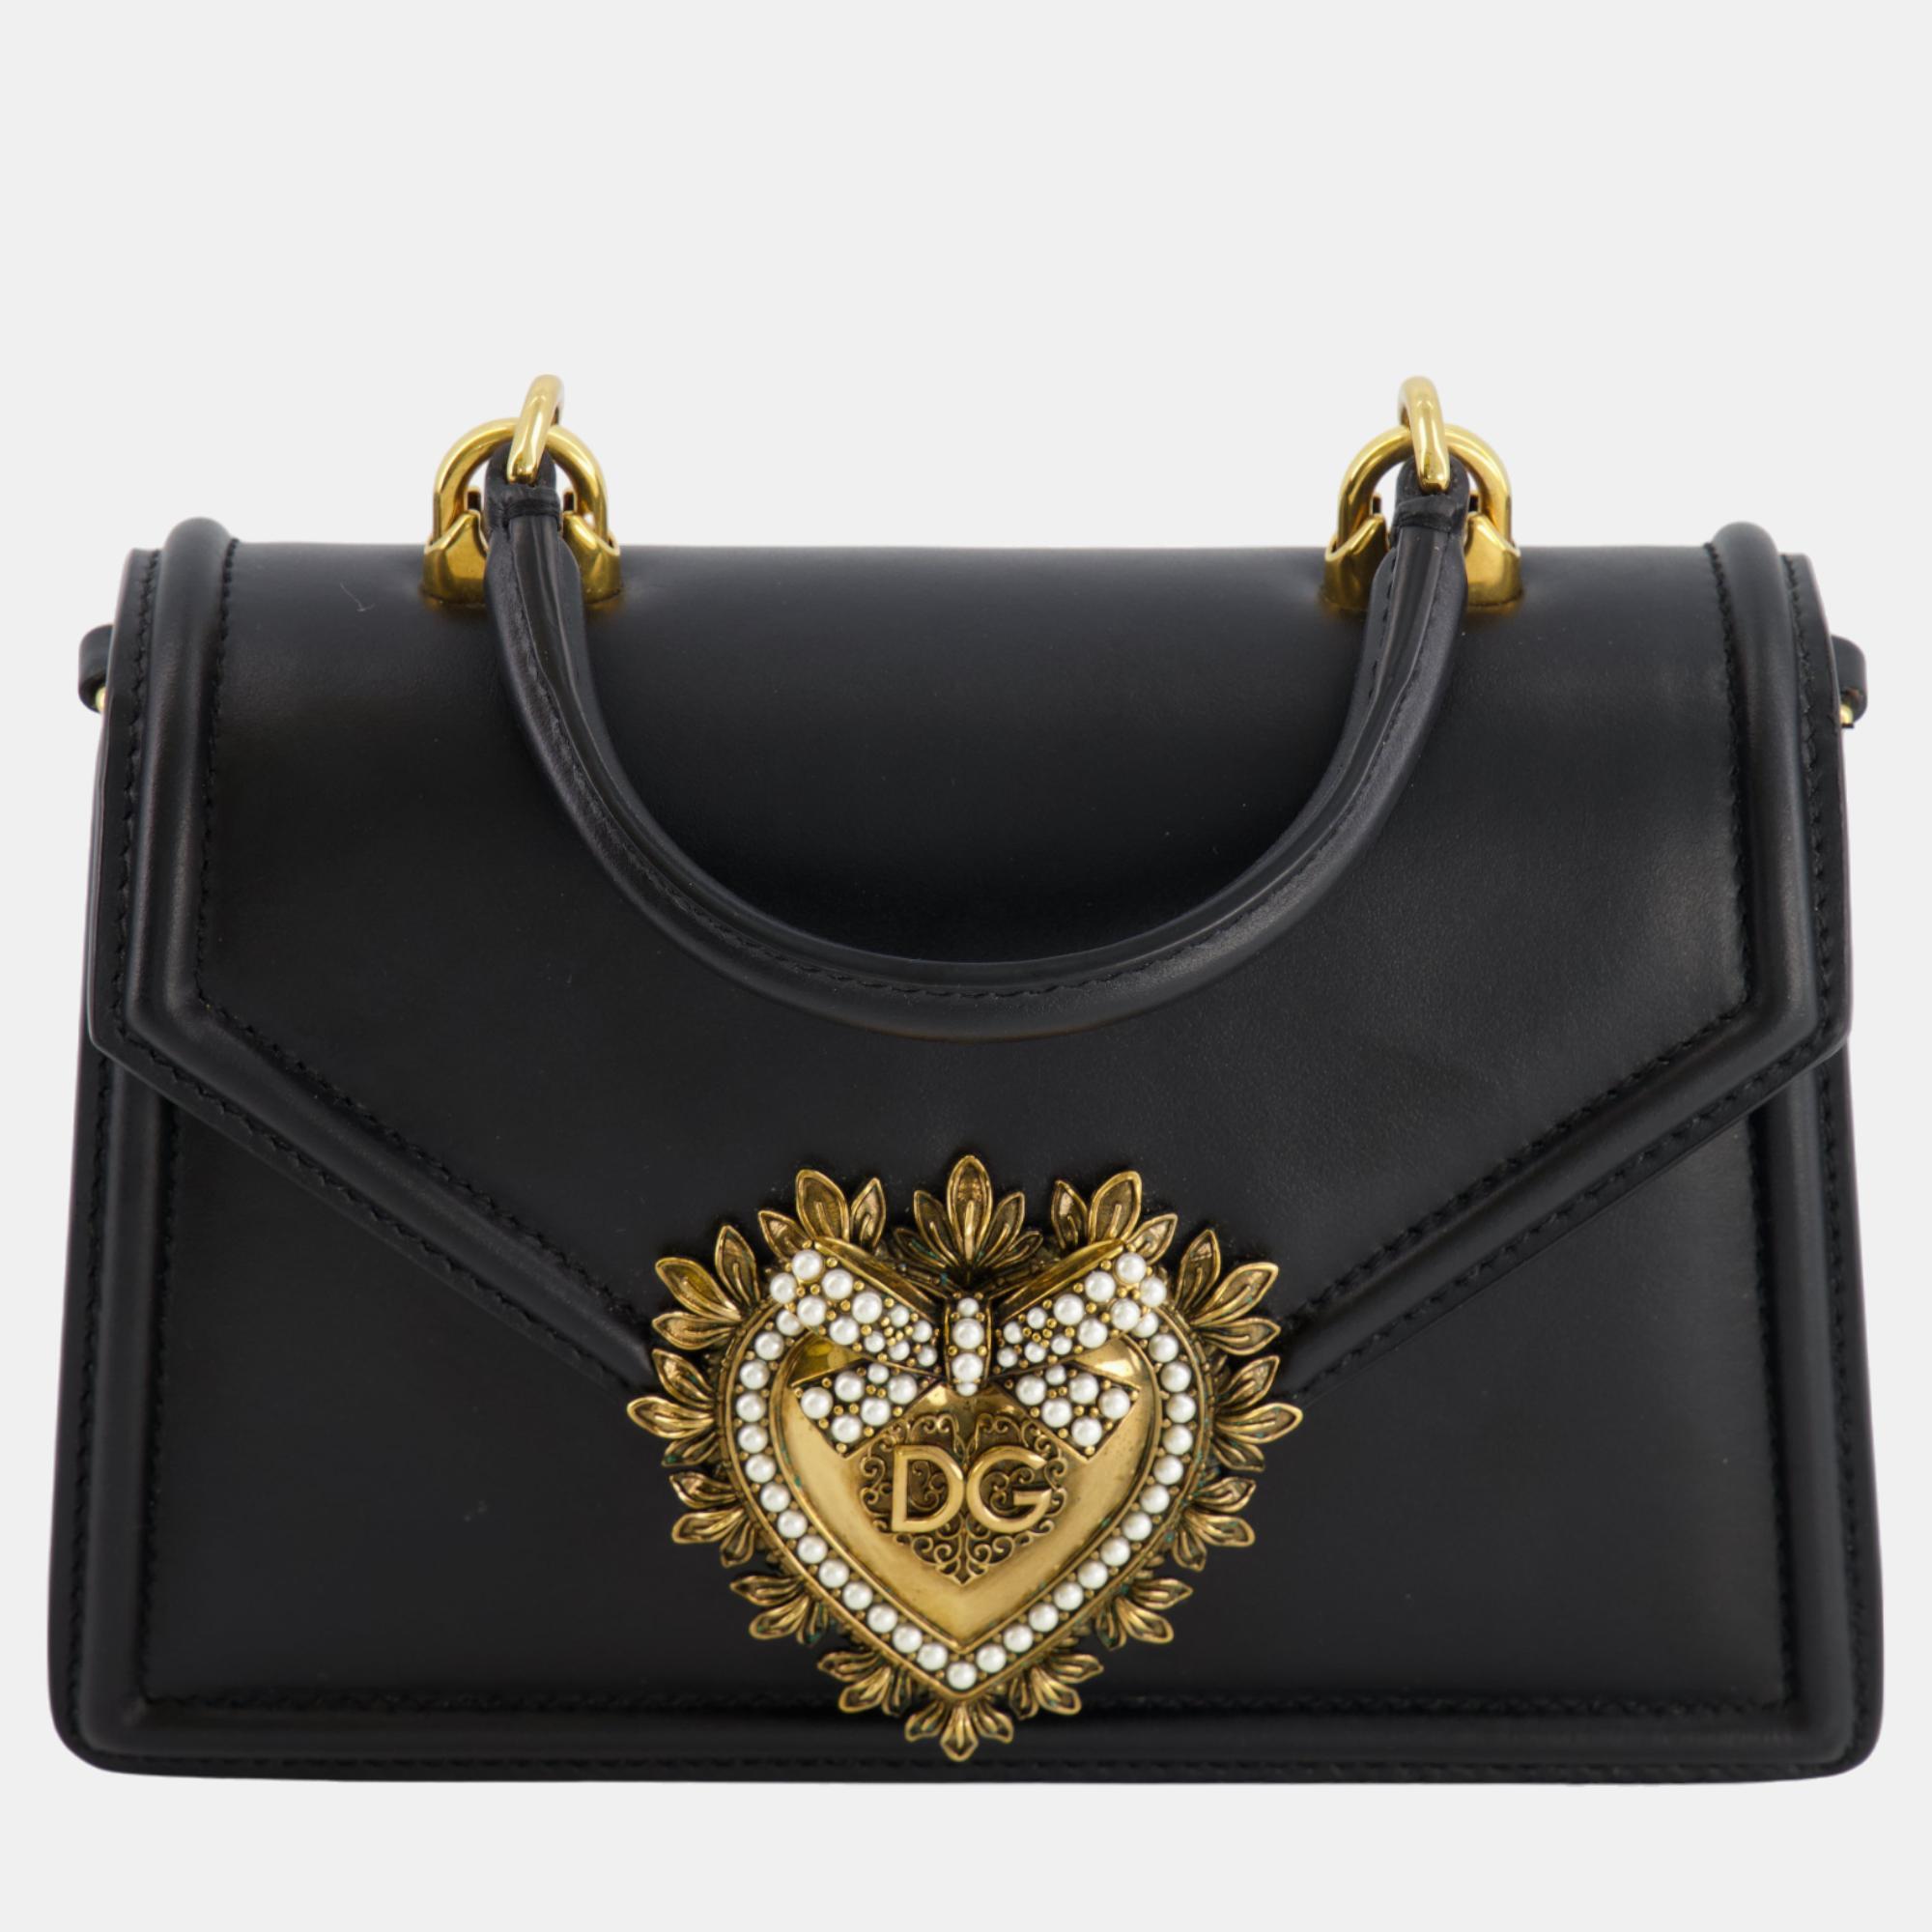 Dolce & Gabbana Black Leather Small Devotion Top-Handle Bag With Gold Hardware